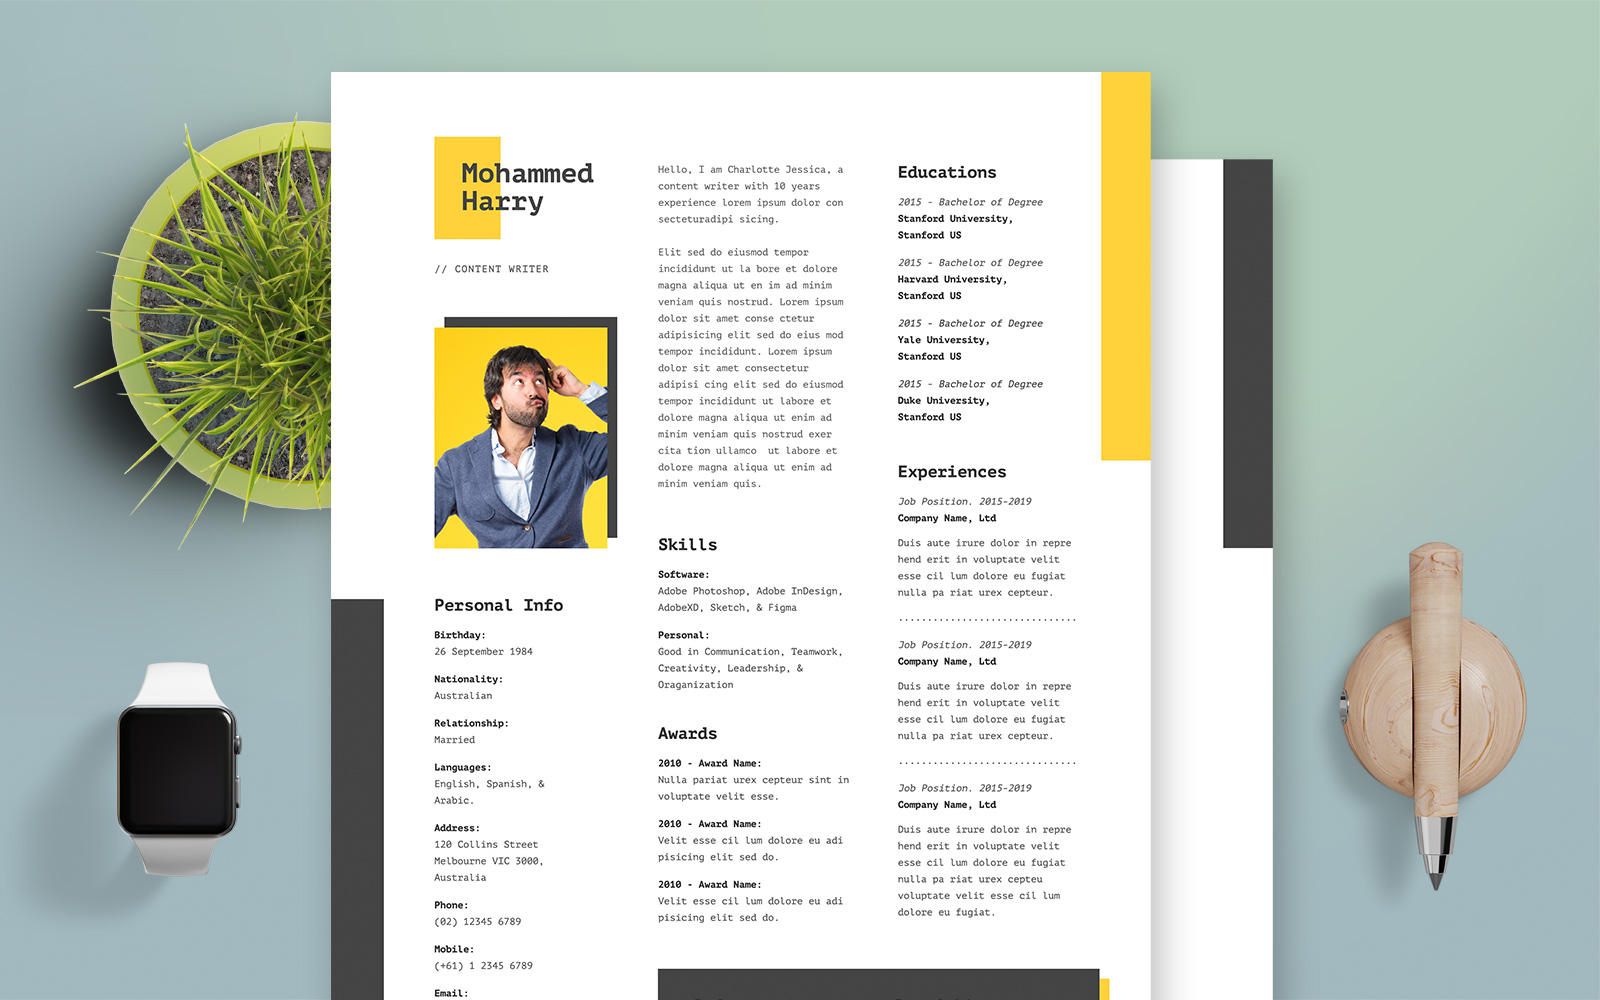 Mohammed harry | Clean Professional Resume Template